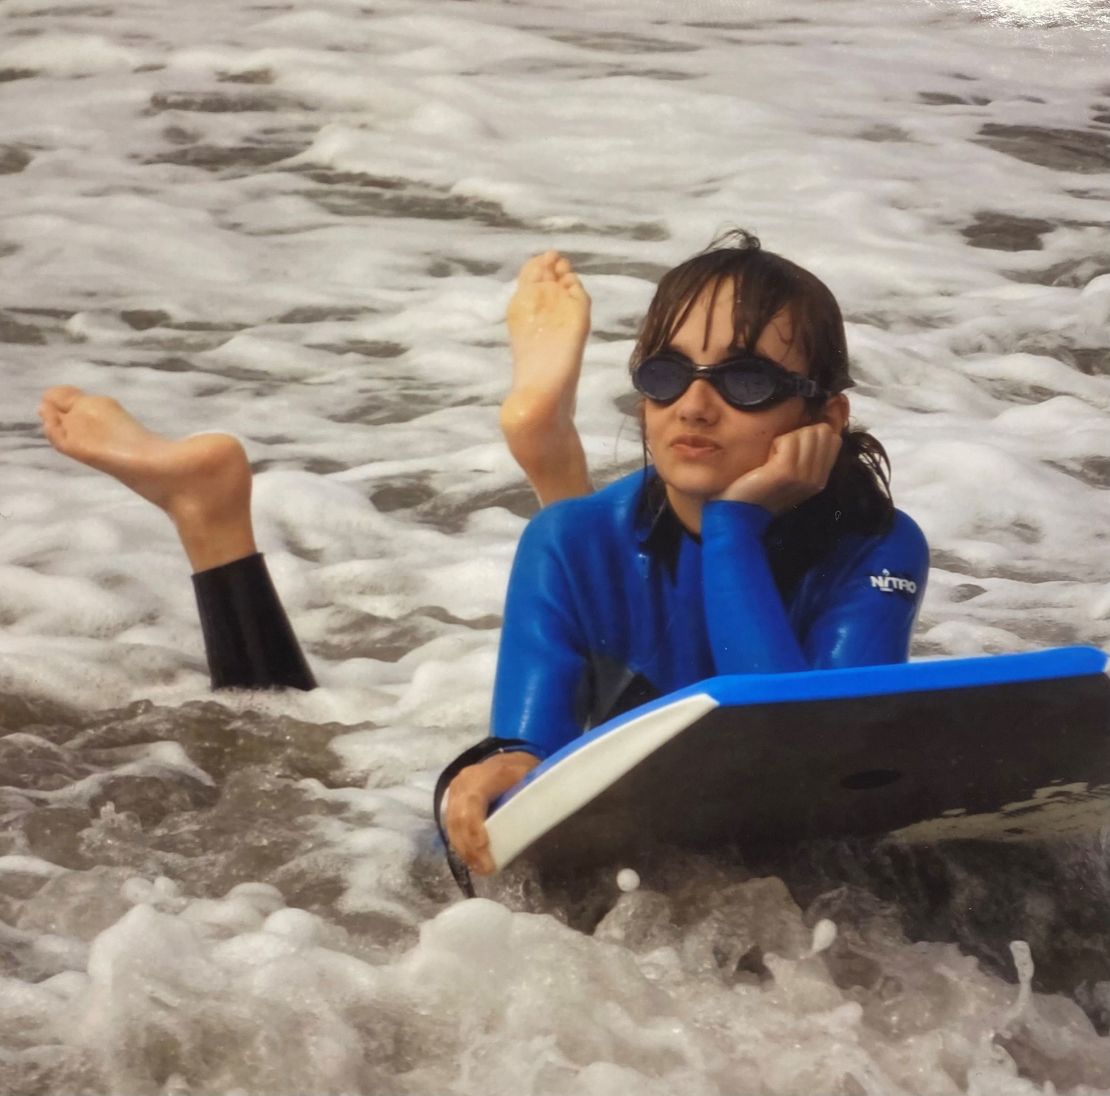 Ruby Fuller was a keen bodyboarder and had always wanted to learn to surf, her mother says. 